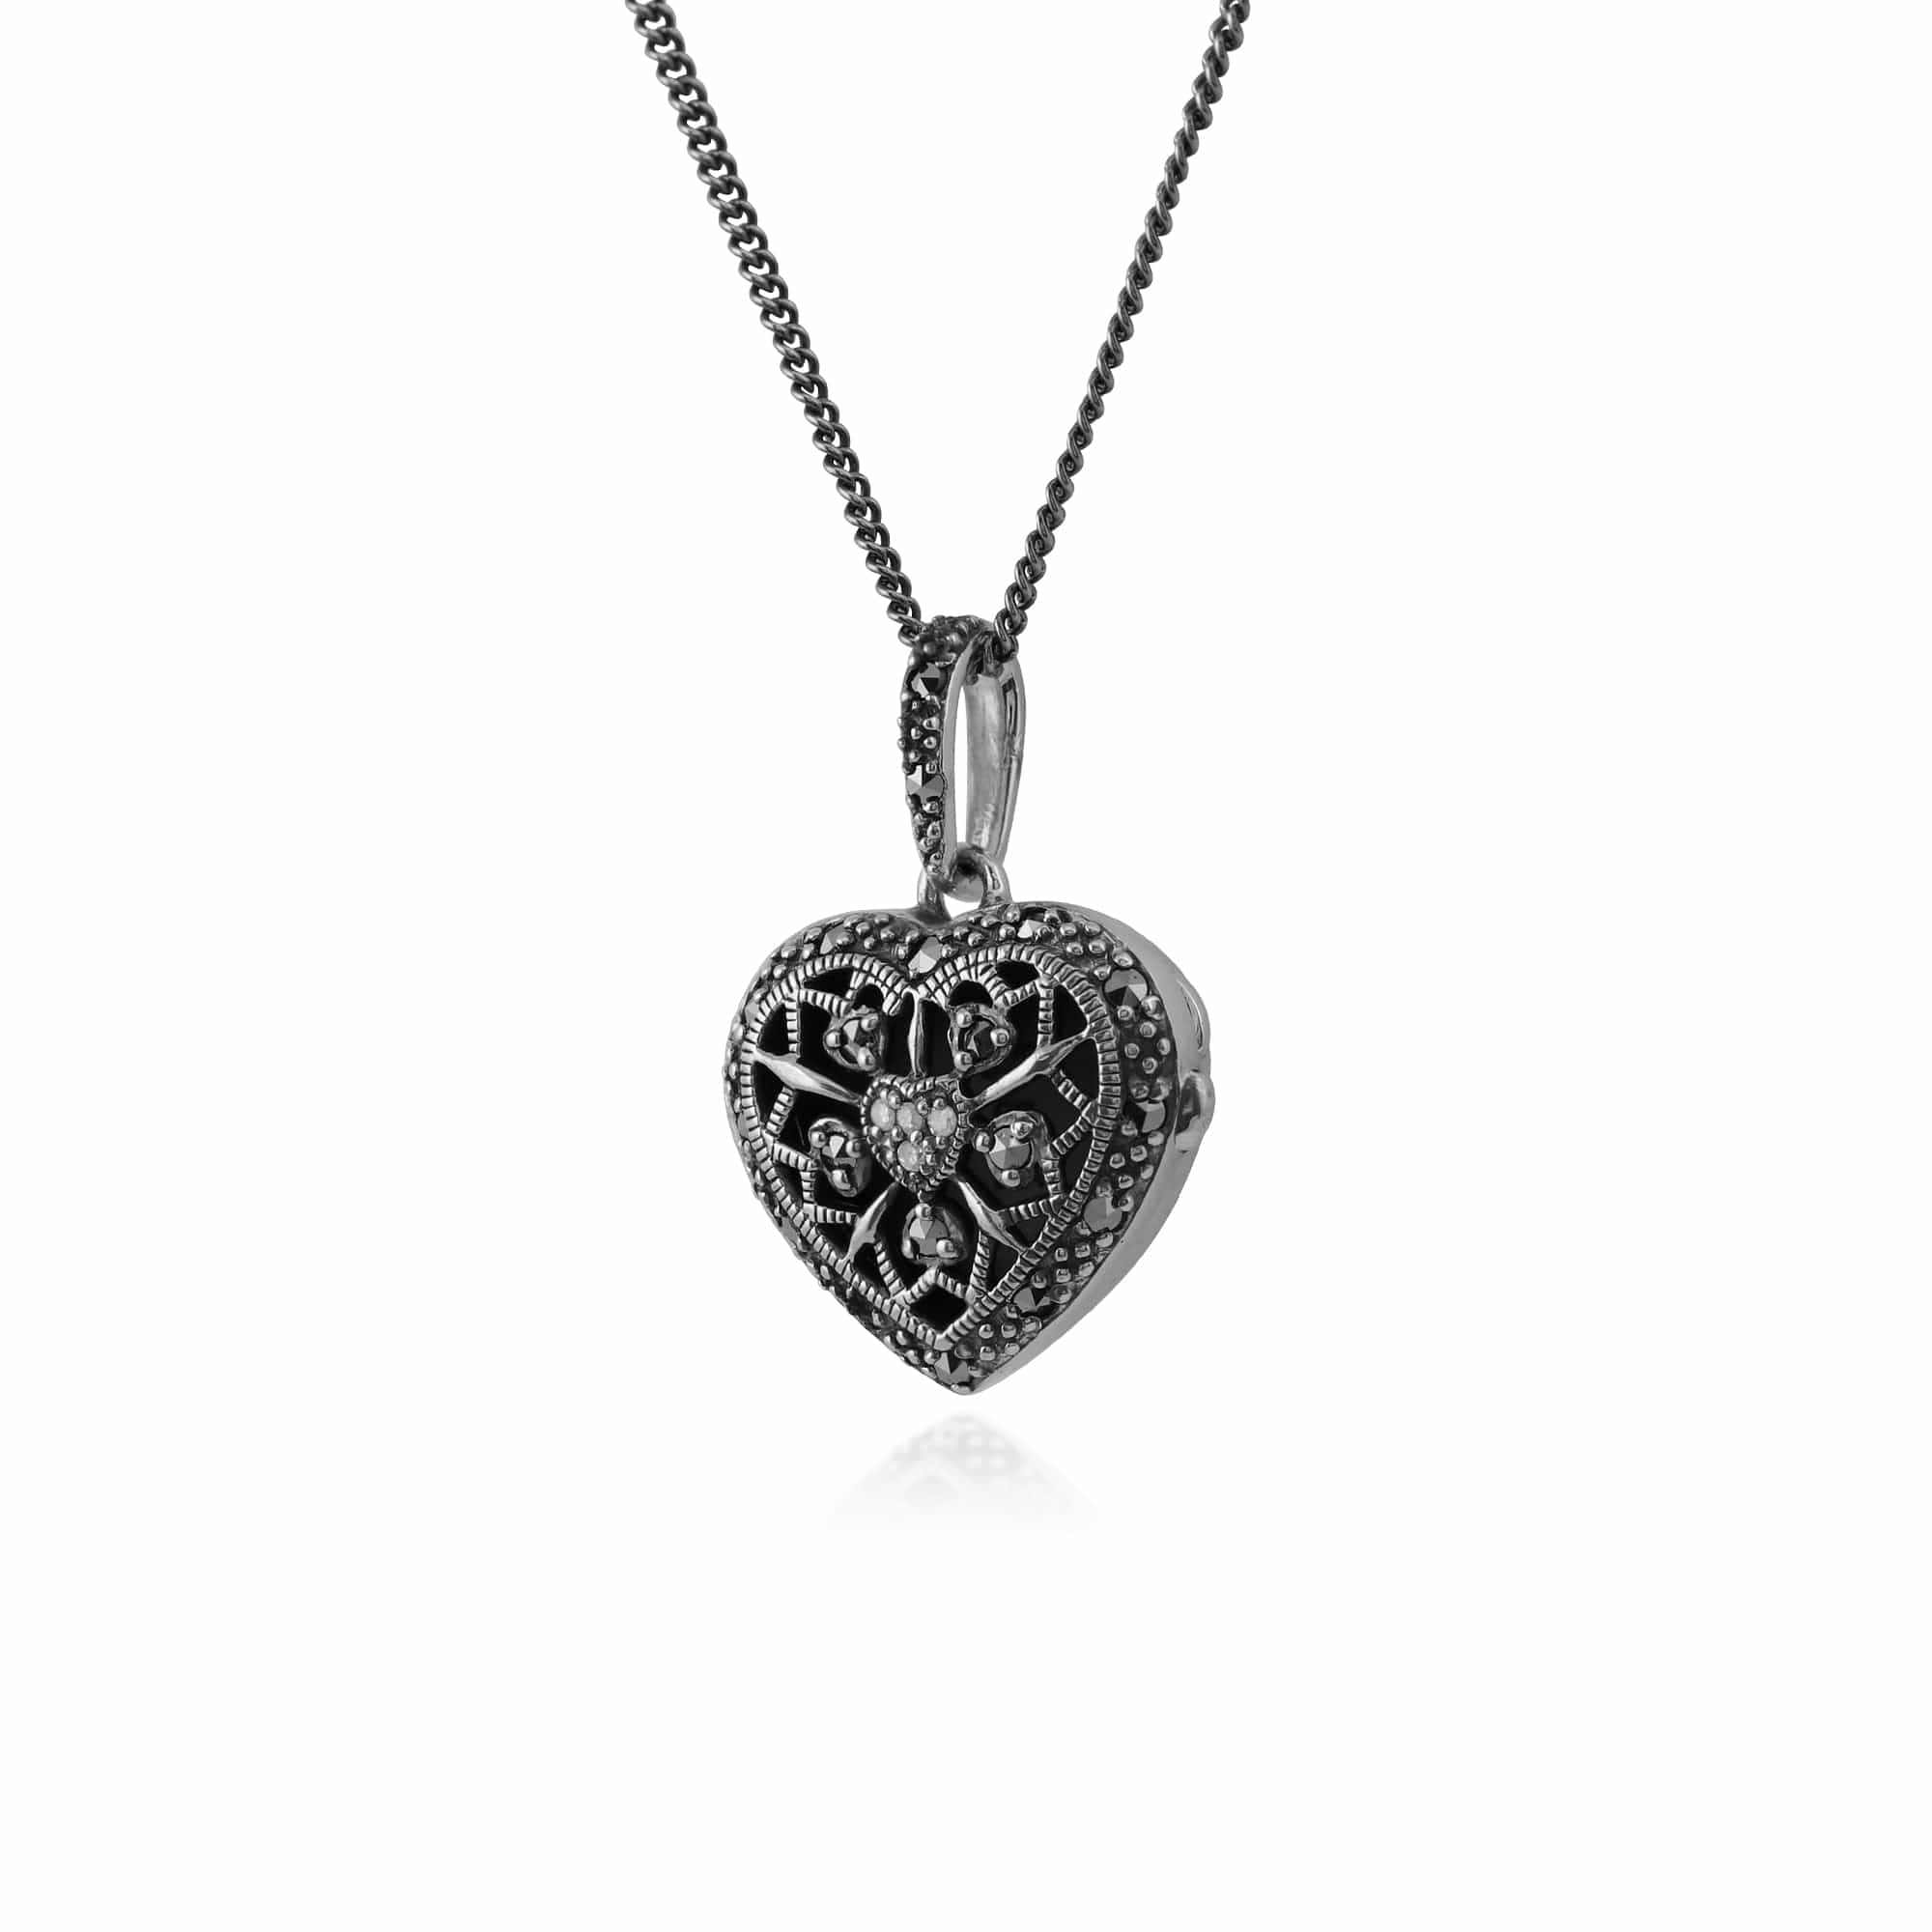 214N688601925 Art Nouveau Style Round Diamond & Marcasite Heart Necklace in 925 Sterling Silver 2